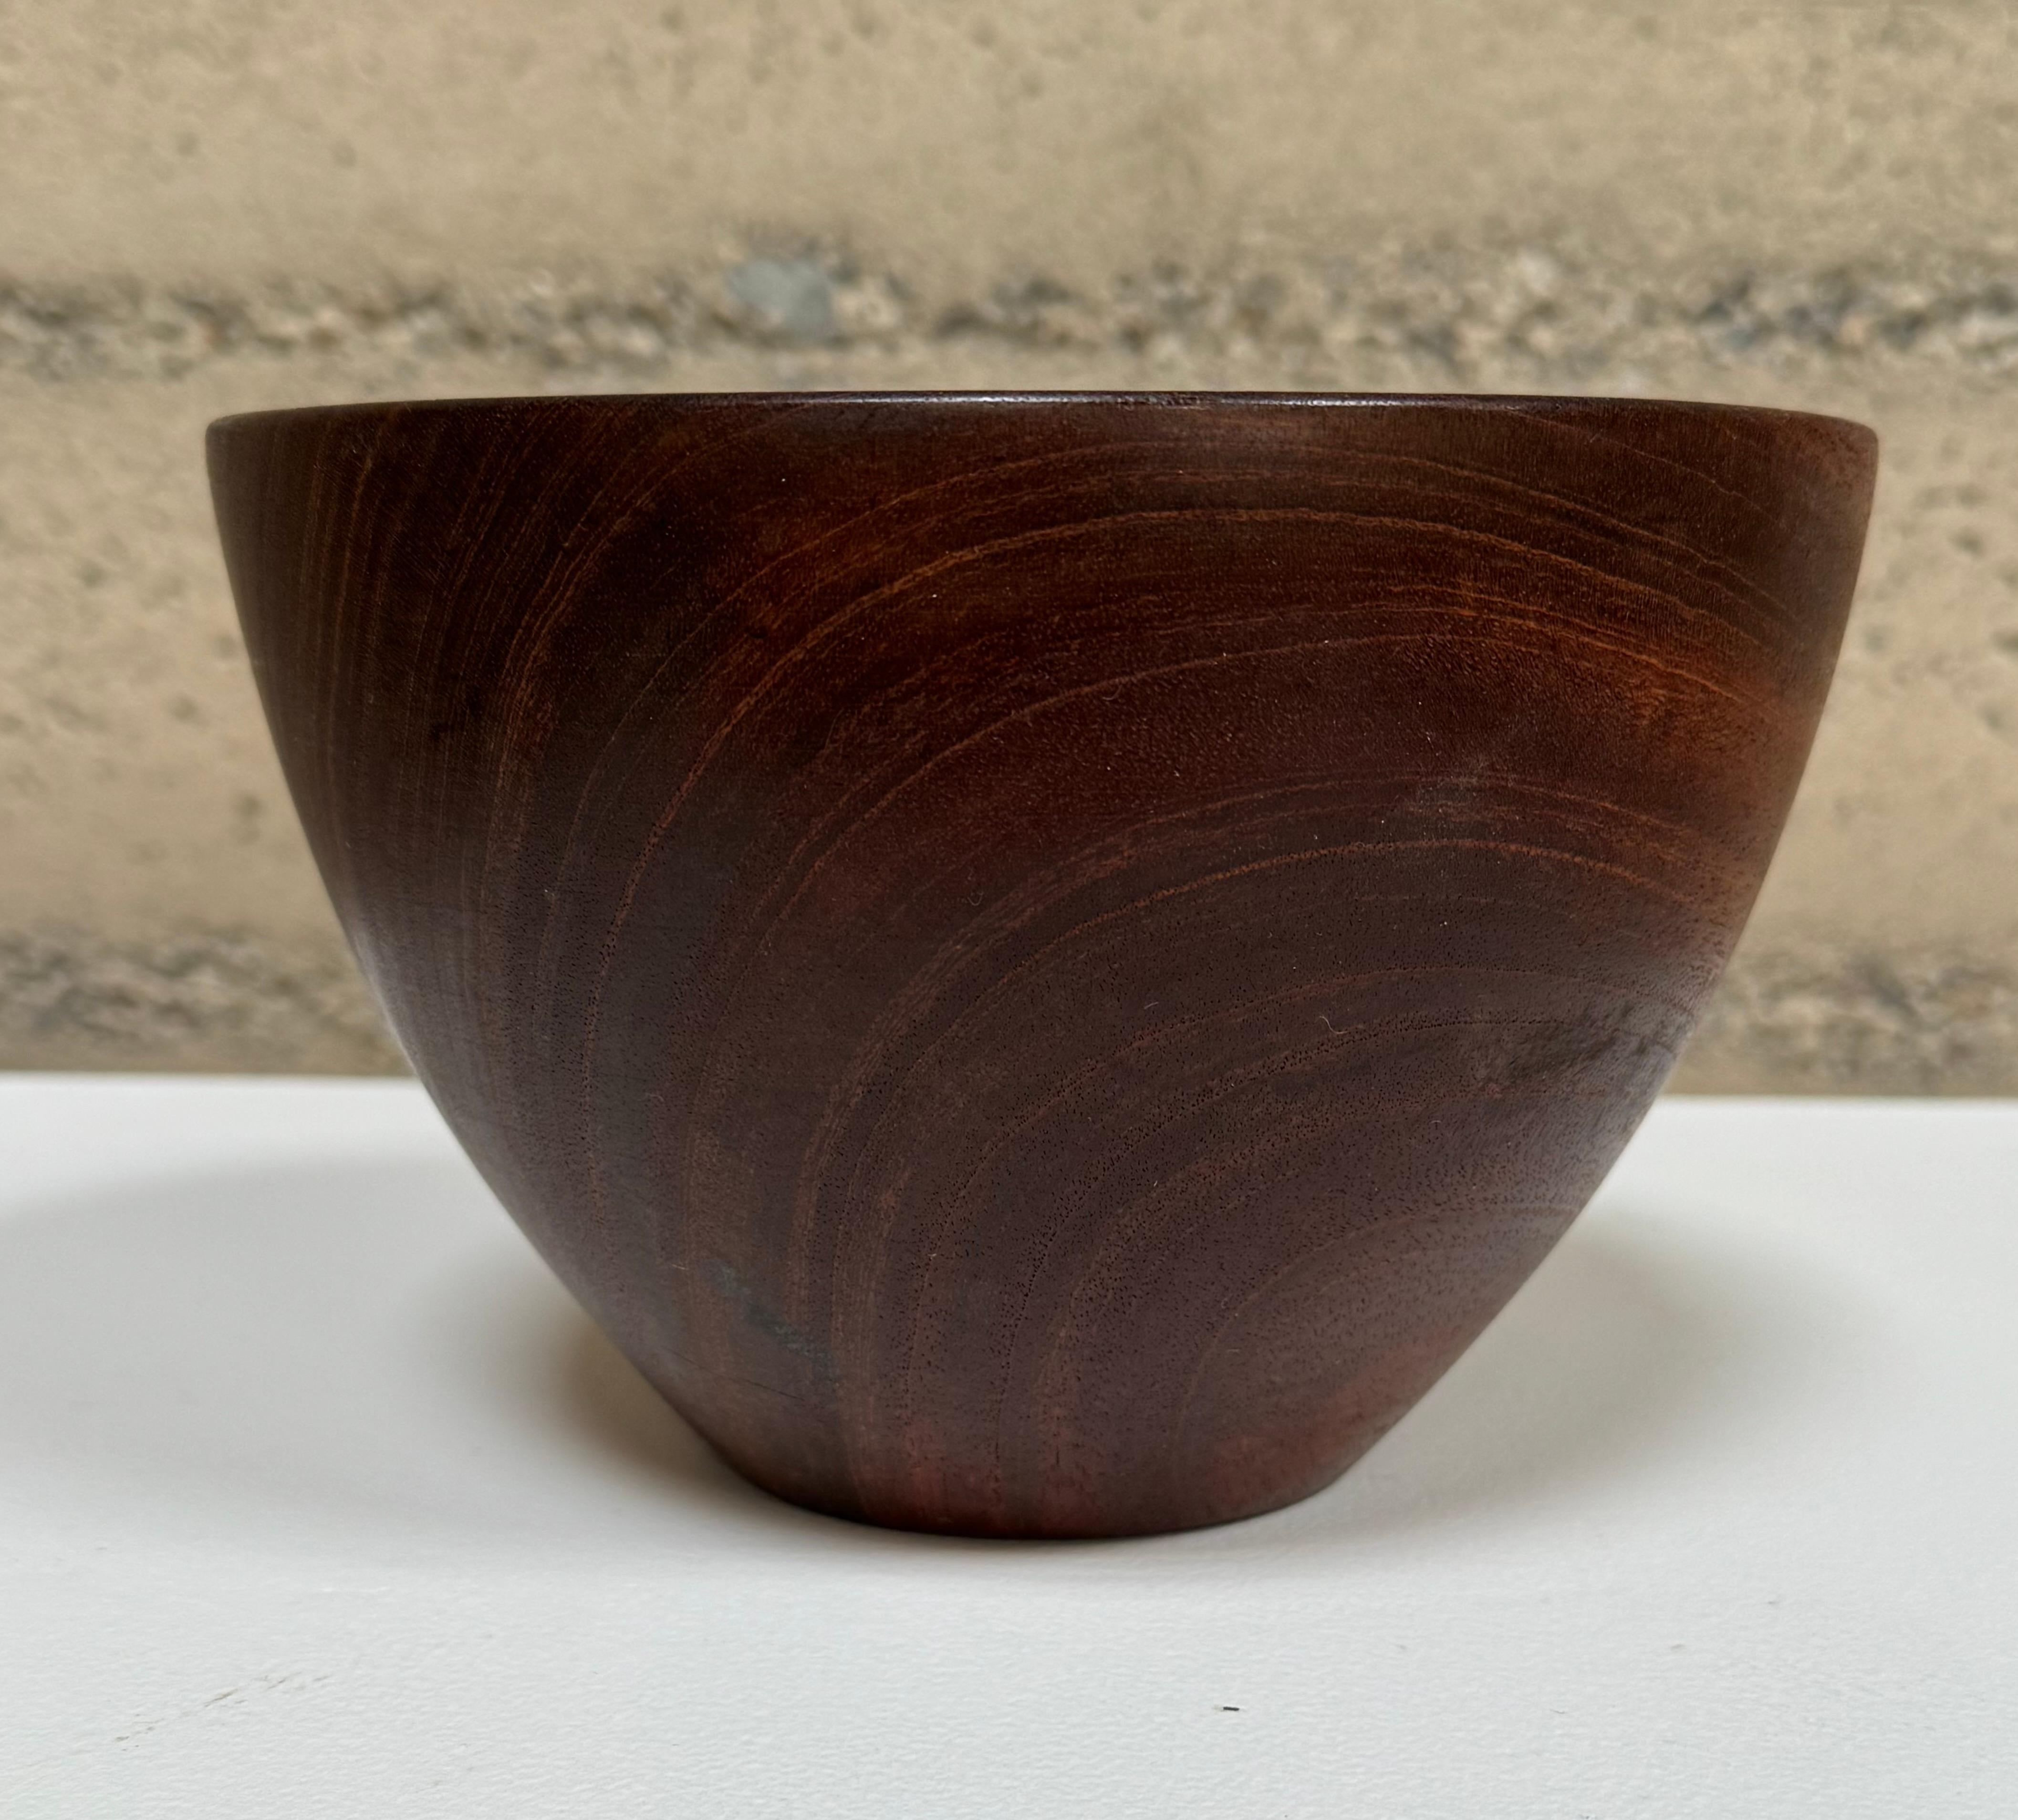 Hand turned walnut bowl by American woodturner Rude Osolnik (1915-2001), with very figurative graining to the wood and his trademark form in this bowl. Signed on the bottom in marker as was his way of marking his work. Osolnik is considered an